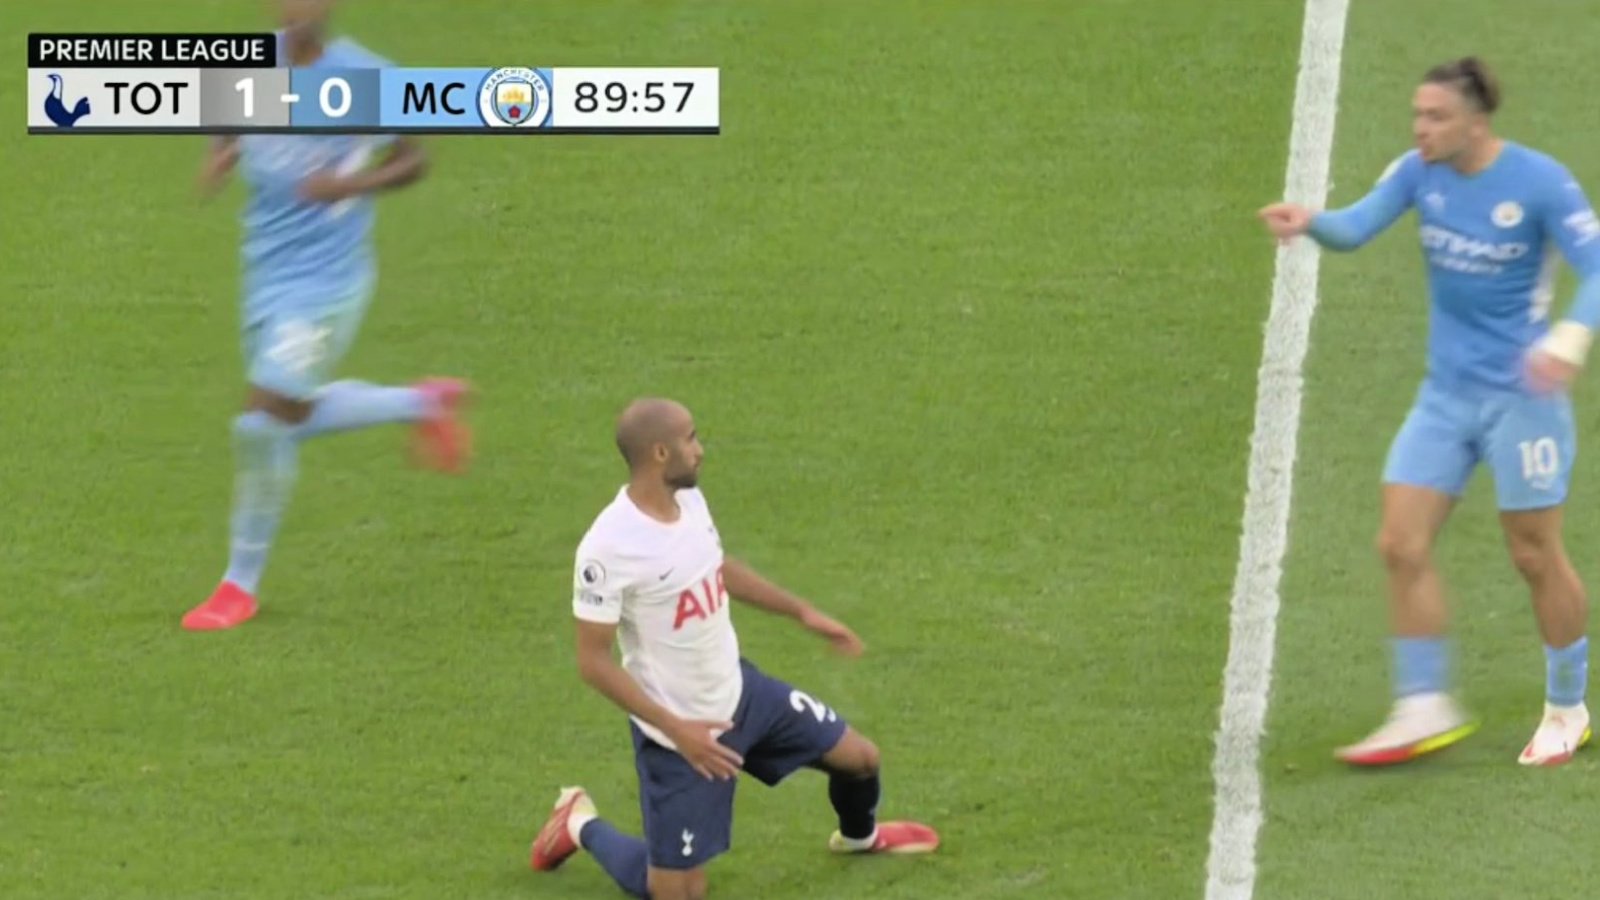 Debutant Jack Grealish accusing Lucas Moura of diving during Spurs' 1-0 win over Manchester City